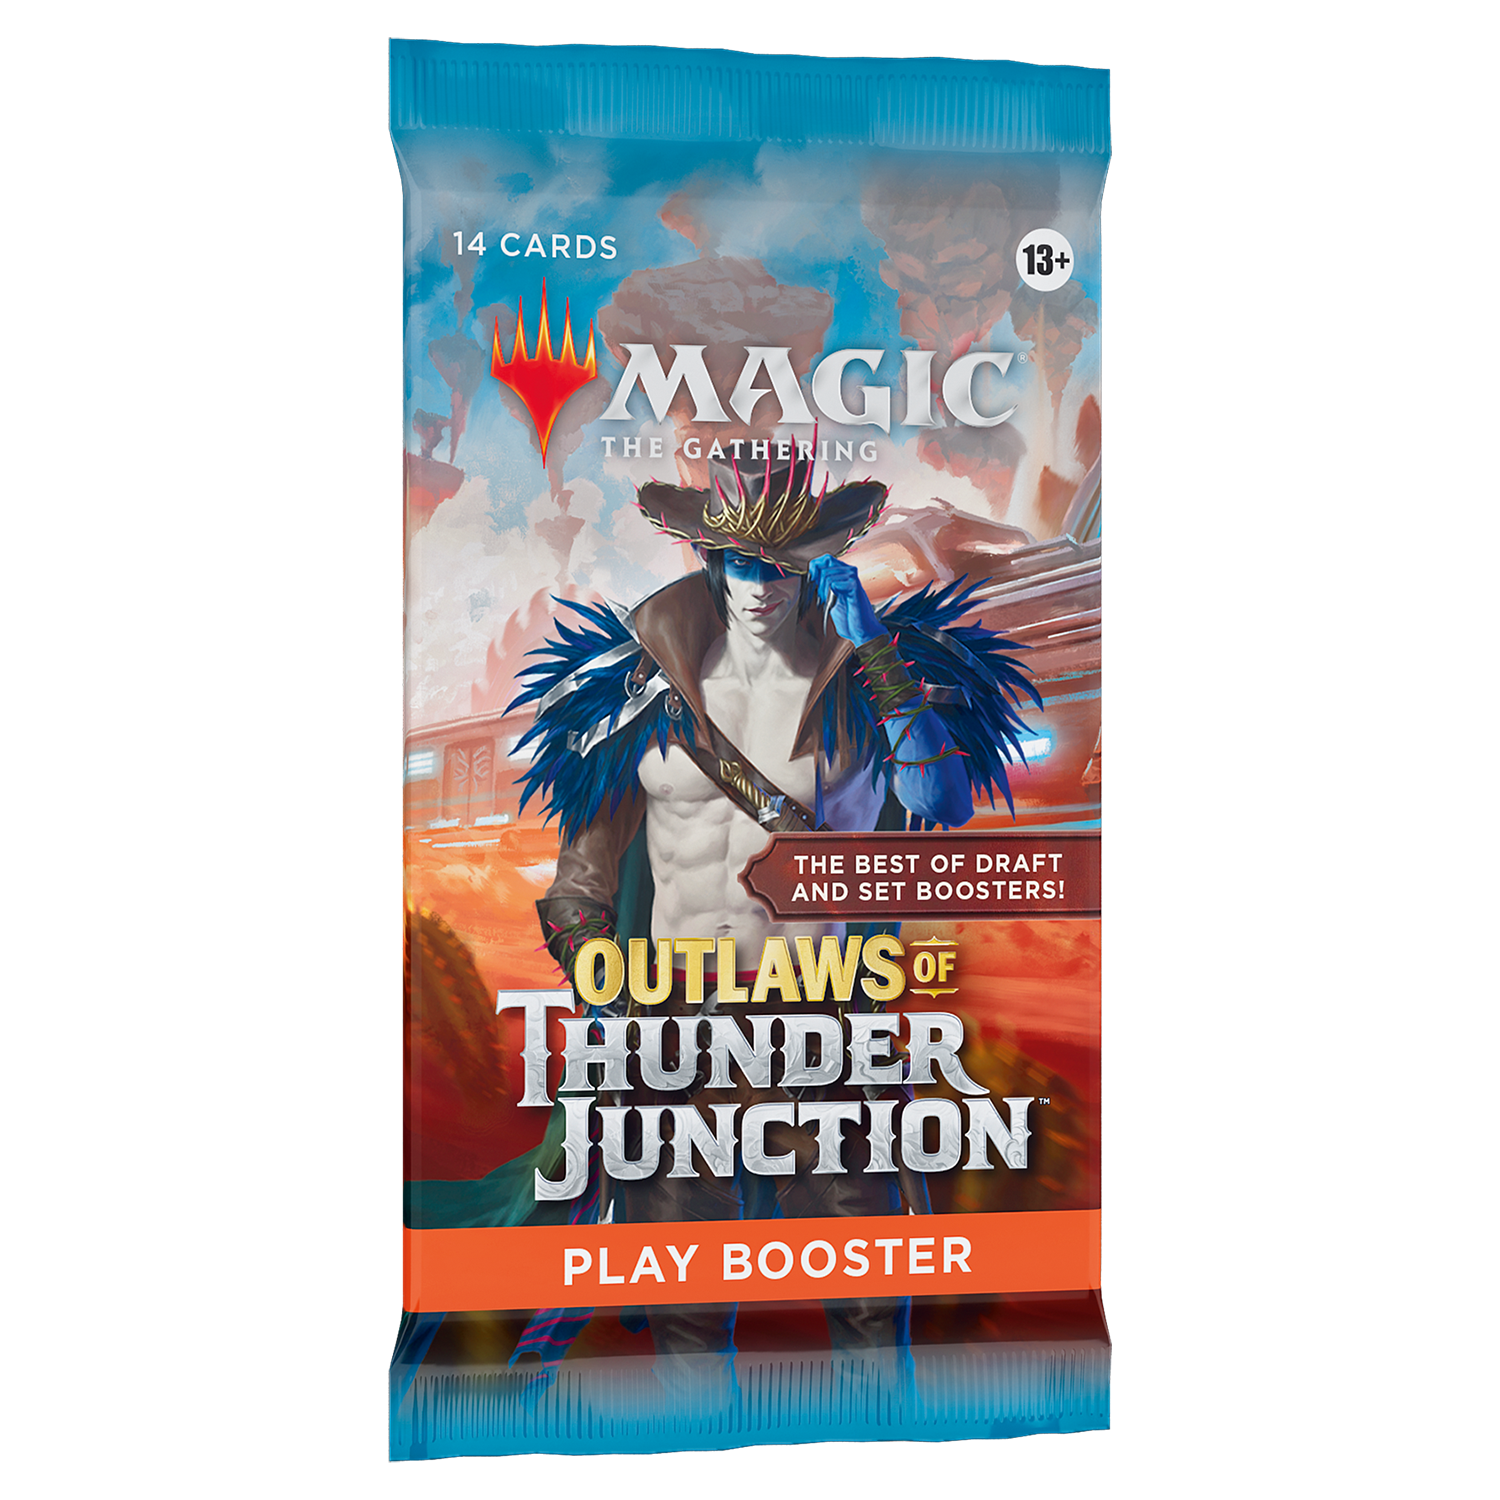 Outlaws of Thunder Junction Play Booster Display - Magic the Gathering - EN